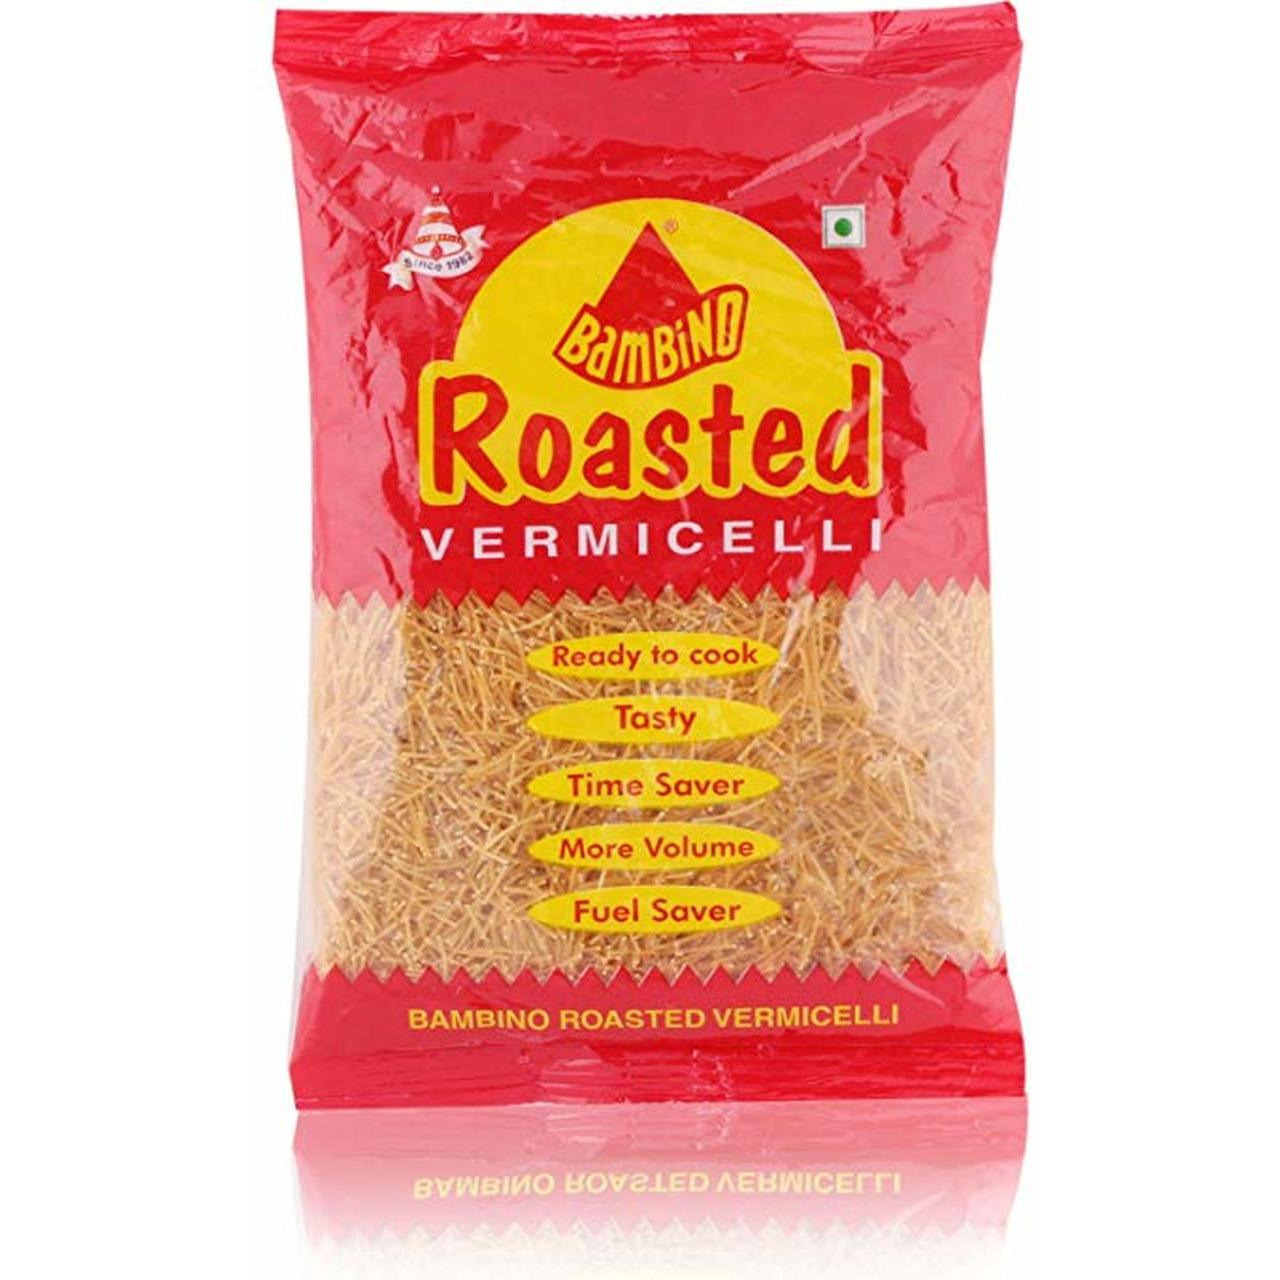 Pack of 4 - Bambino Roasted Vermicelli - 800 Gm (1.76 Lb)